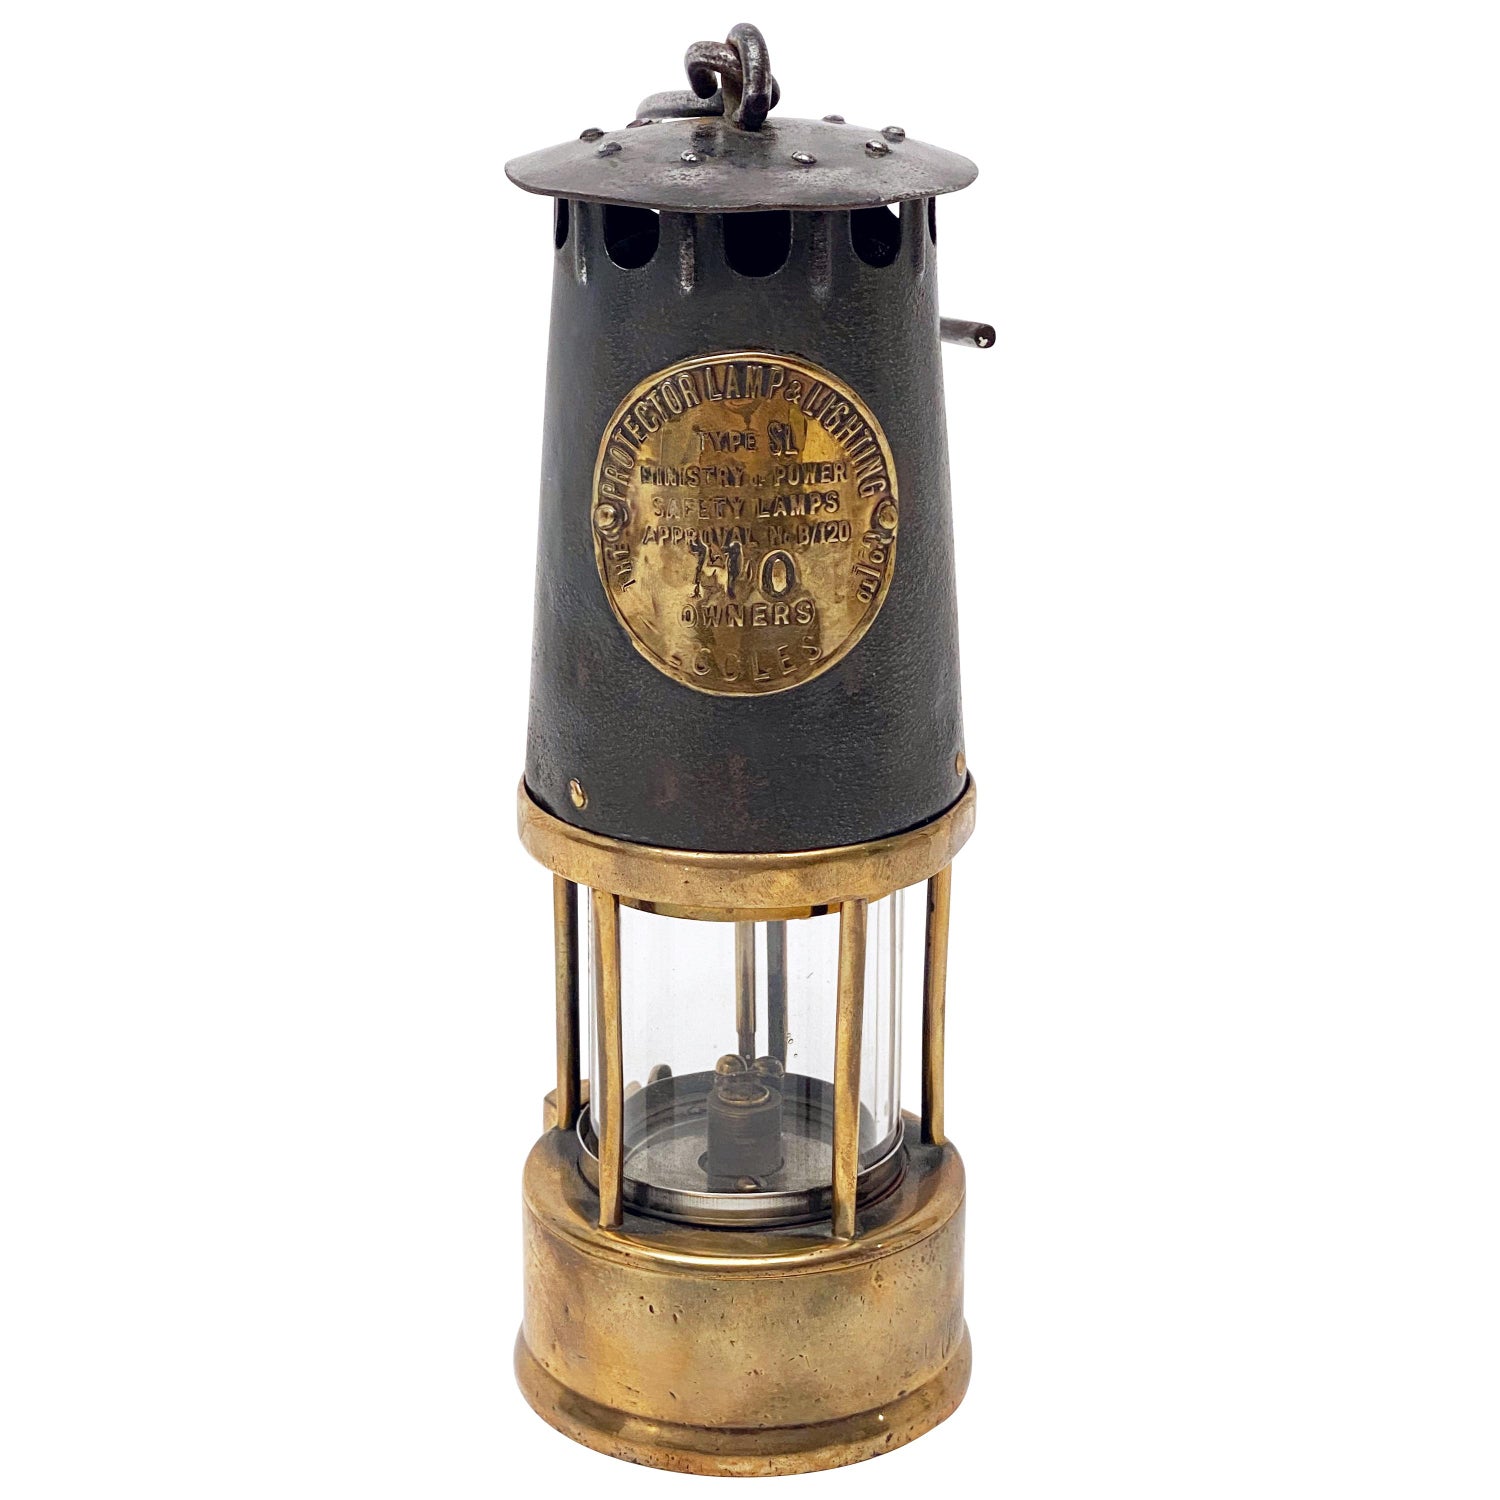 Antique Miners Lamp - 4 For Sale on 1stDibs | antique miners lamps for sale,  miners lanterns, miners light